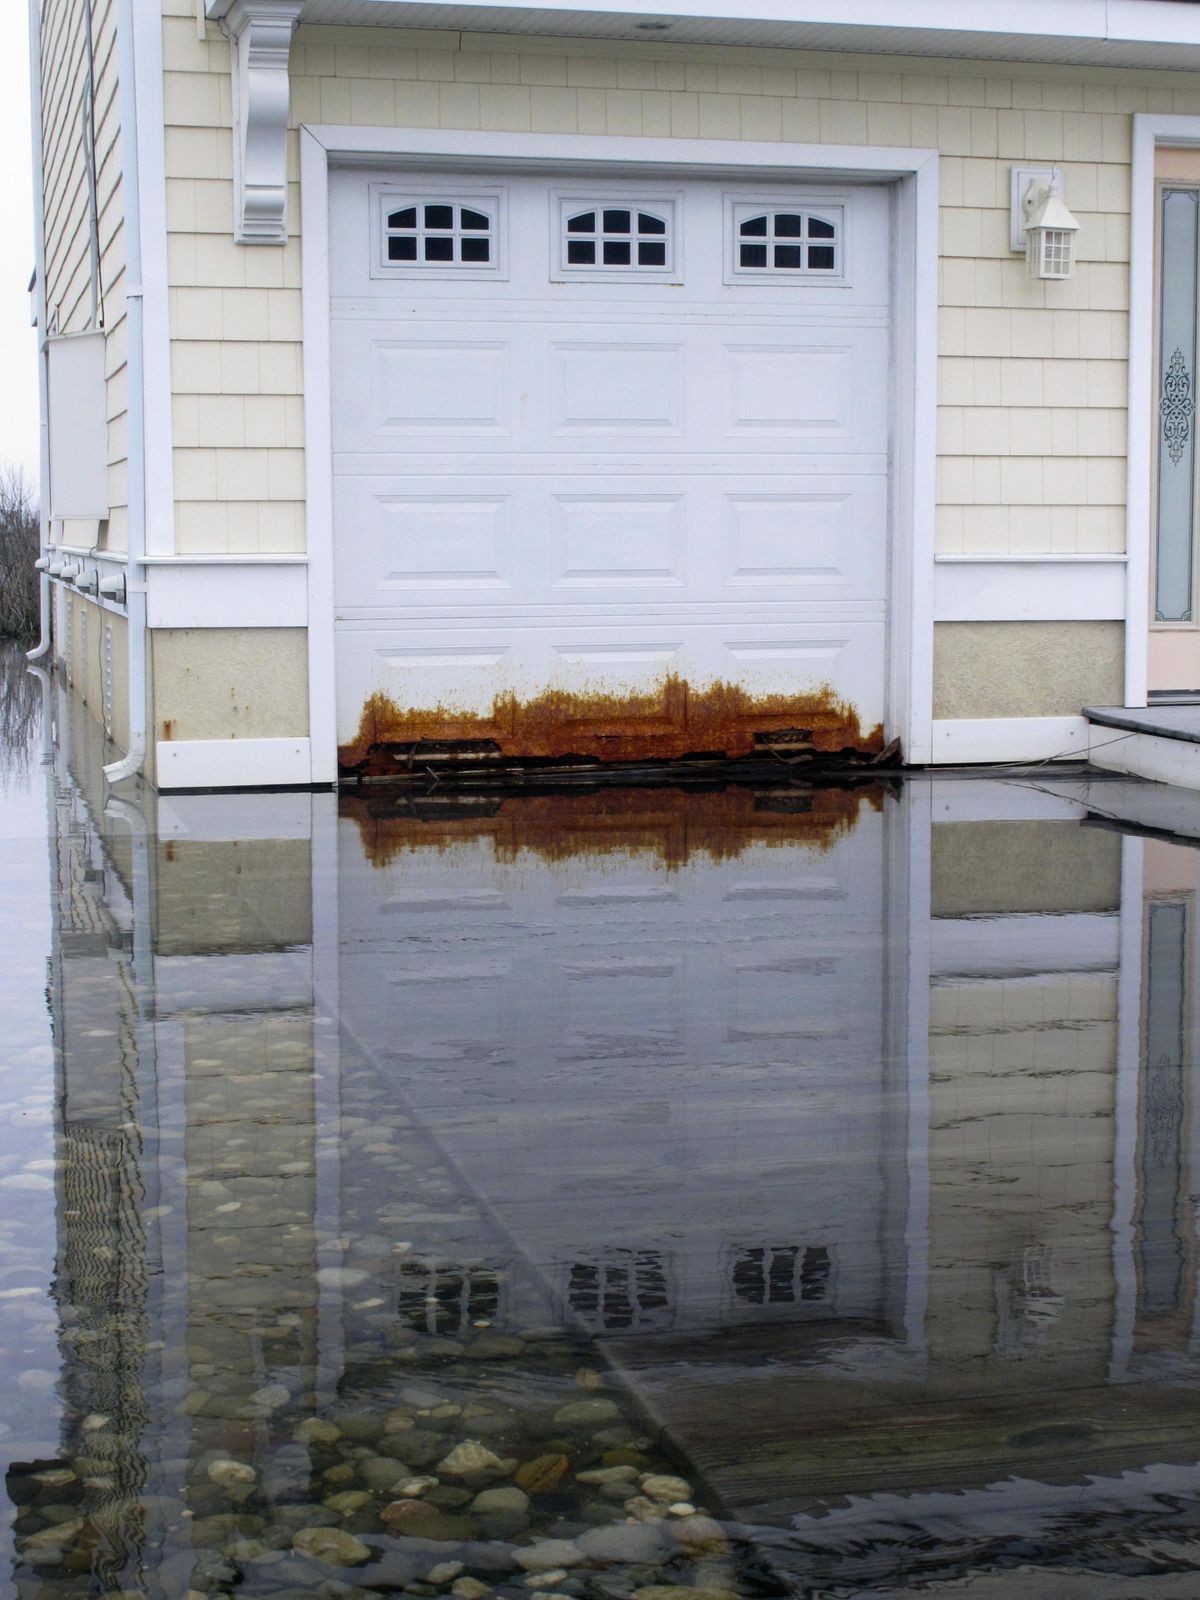 This April 26, 2017 photo shows a garage door on a home in Ocean City on the edge of a back bay that floods regularly, and has rusted the metal door. Scientists and people living in back-bay areas behind barrier islands say flooding is increasing, even as the problem gets less attention and money than flooding along the ocean. (Wayne Parry / Associated Press)